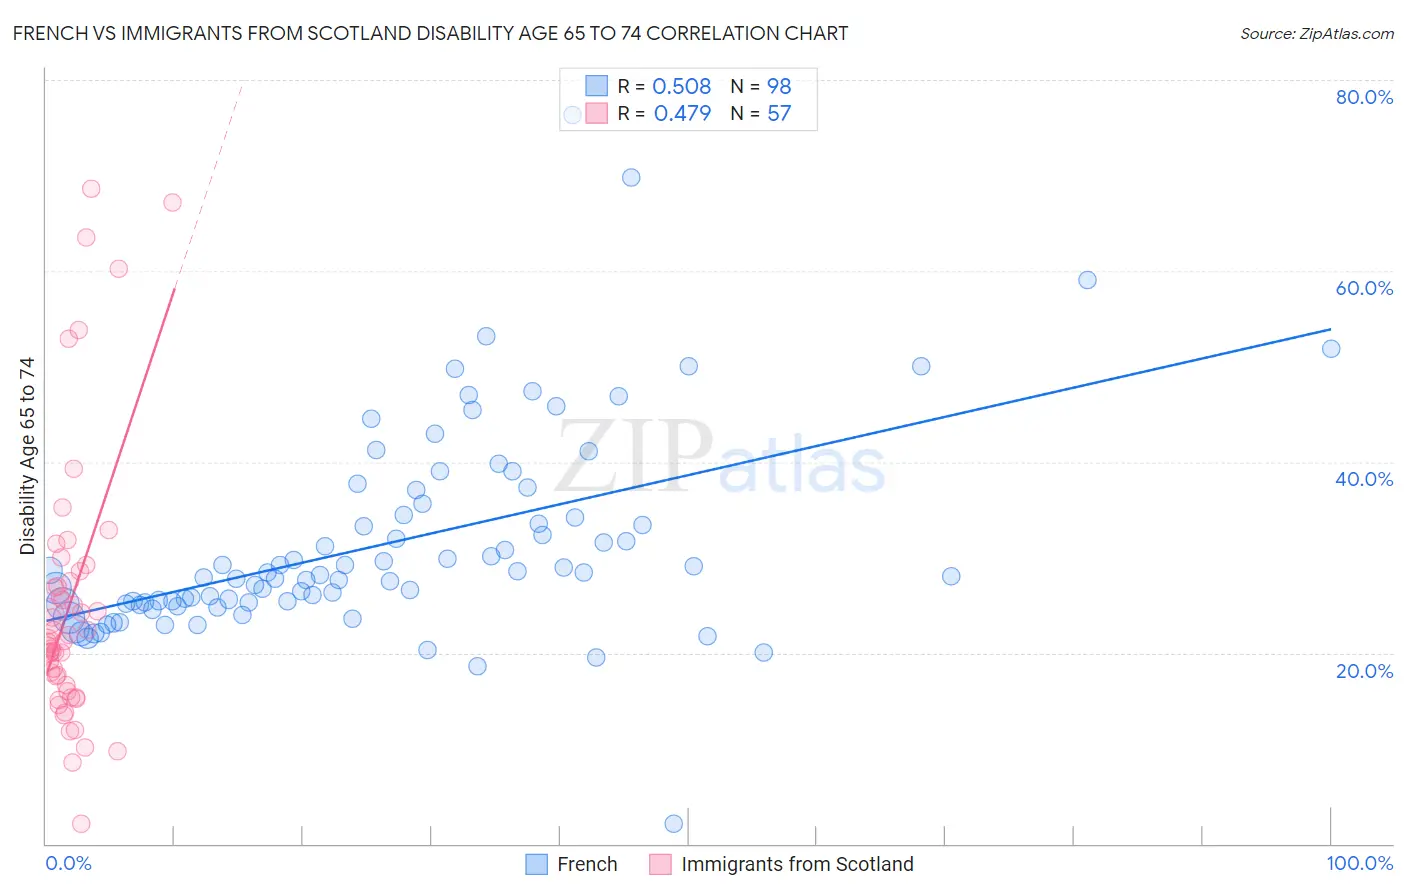 French vs Immigrants from Scotland Disability Age 65 to 74